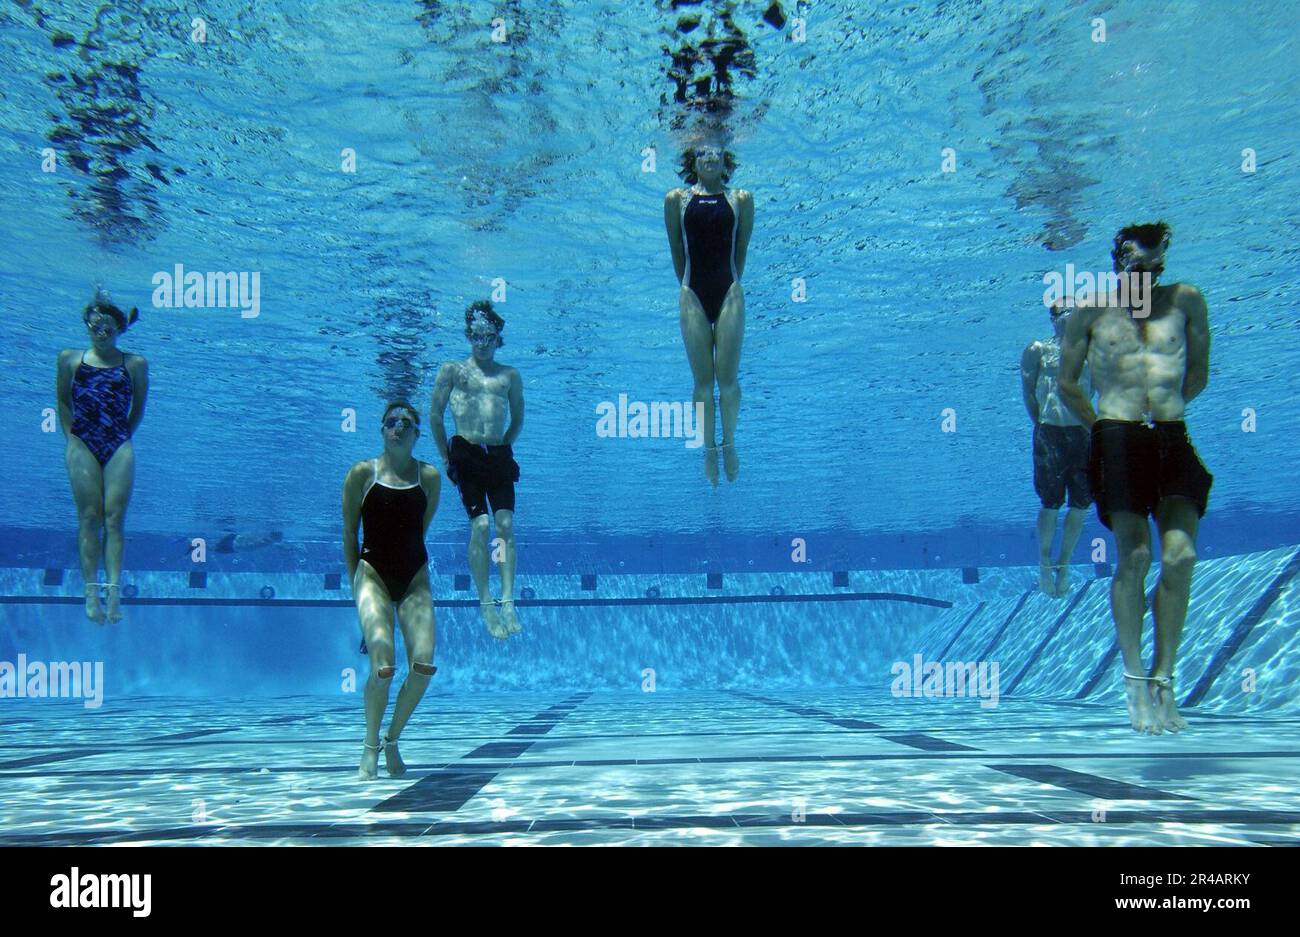 US Navy  U.S. Olympic Team triathletes perform down proofing exercises in the pool during a day of training with Navy SEALs (Sea, Air, Land) on board Naval Special Warfare Center, San Diego, Calif. Stock Photo